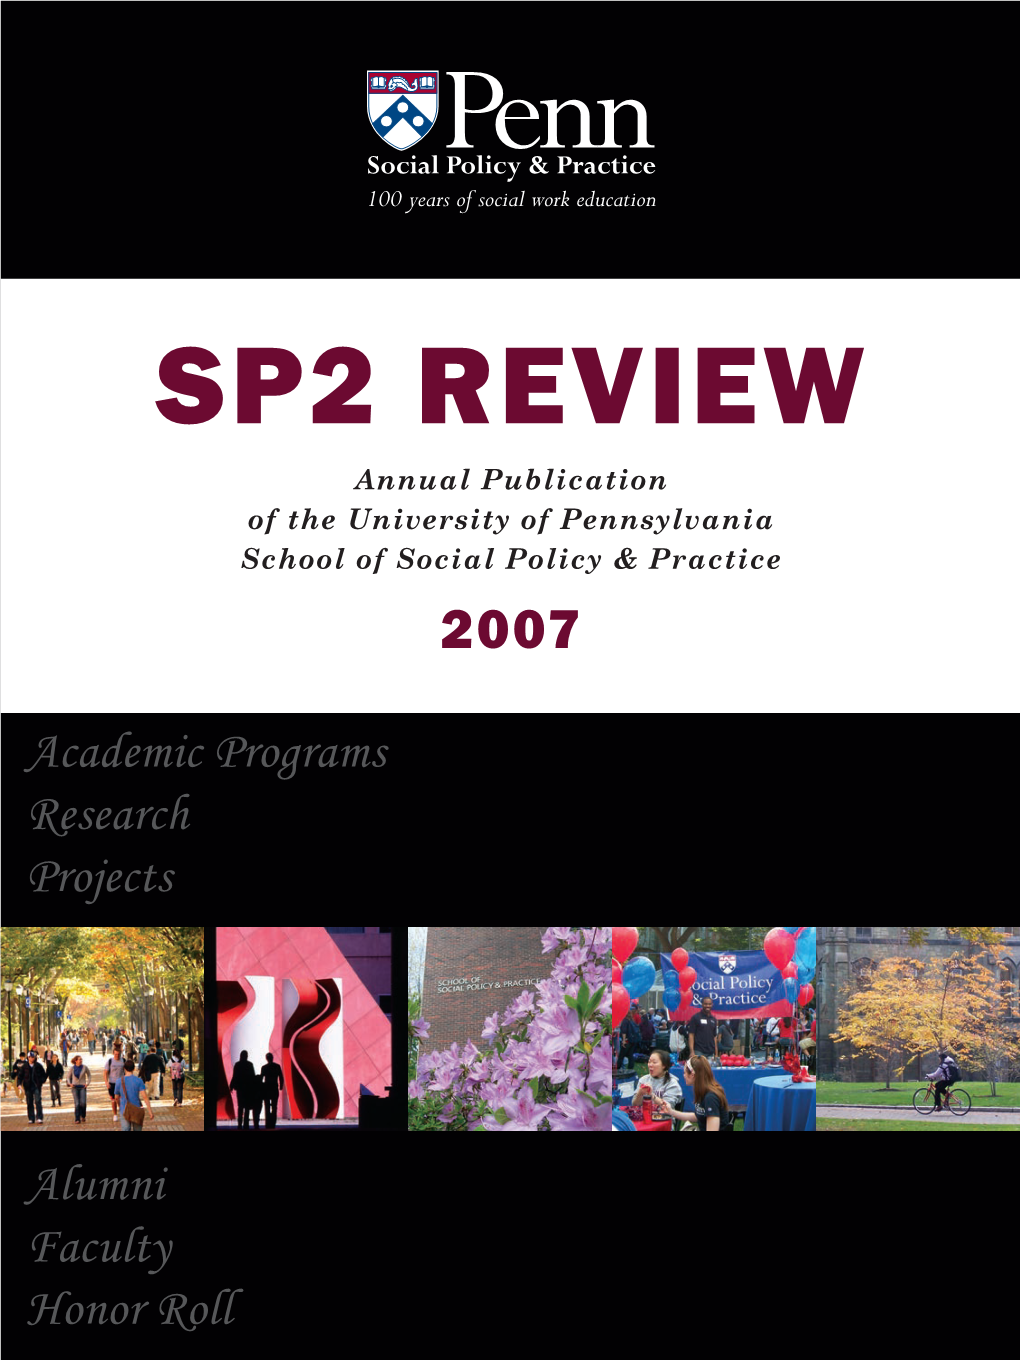 SP2 REVIEW Annual Publication of the University of Pennsylvania School of Social Policy & Practice 2007